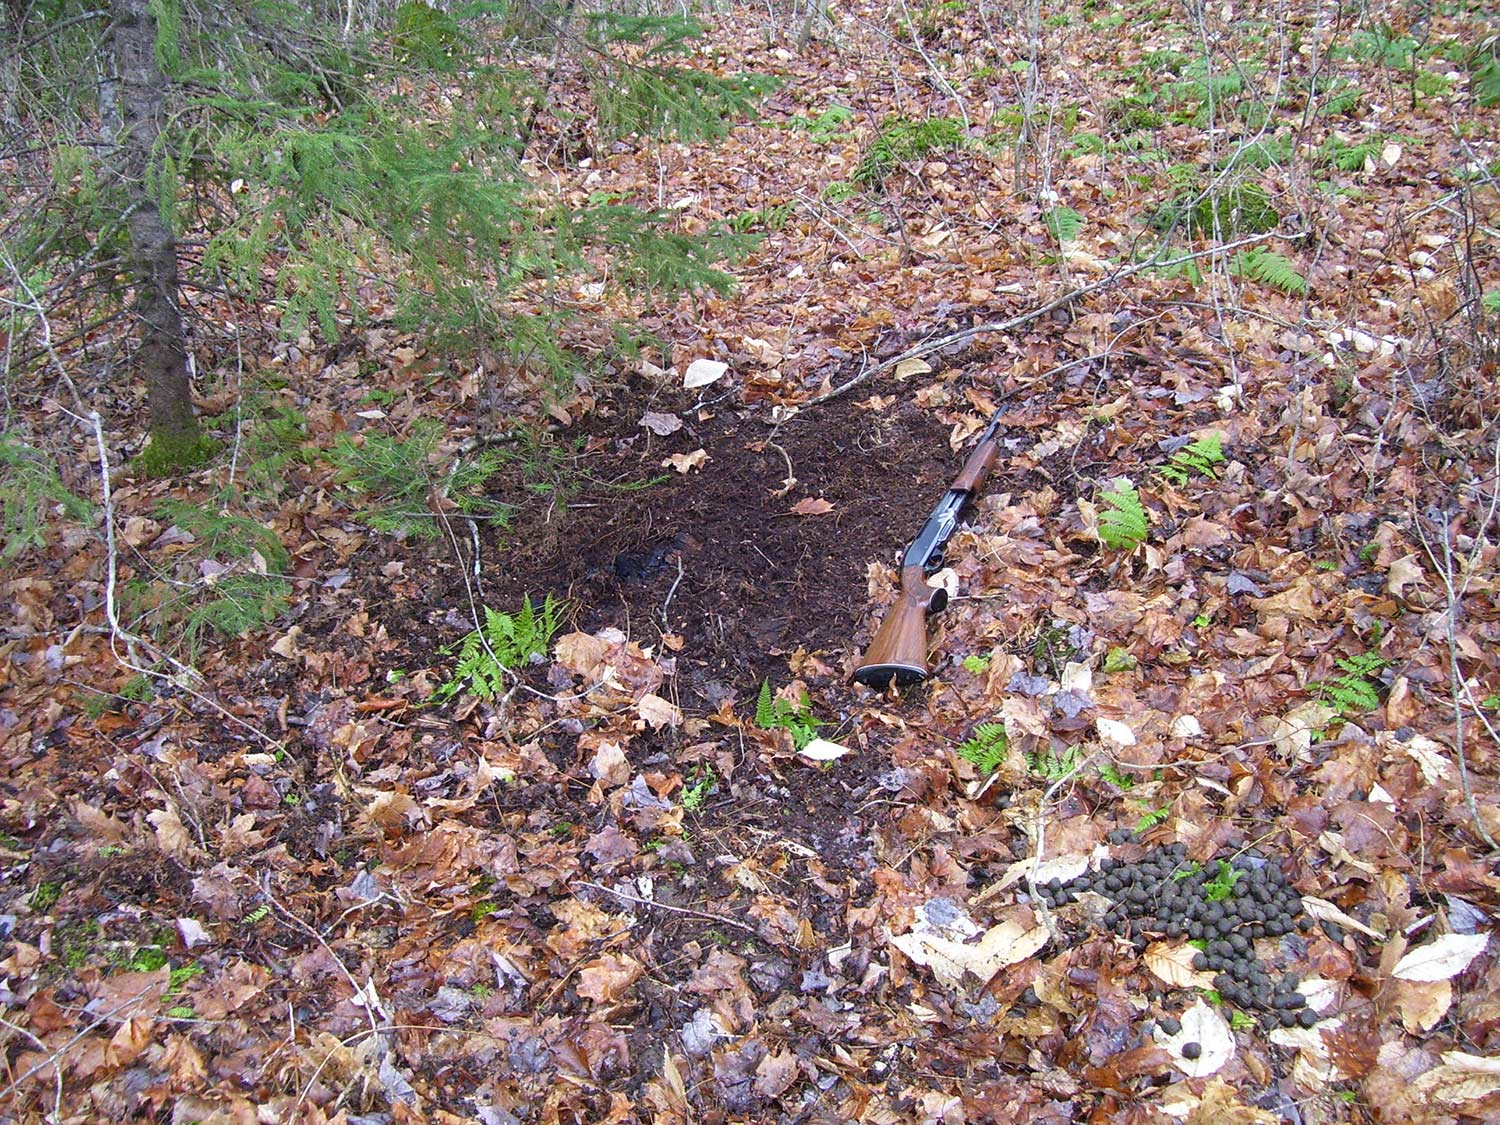 A rifle on the group in a pile of leaves next to a disturbed area of ground.